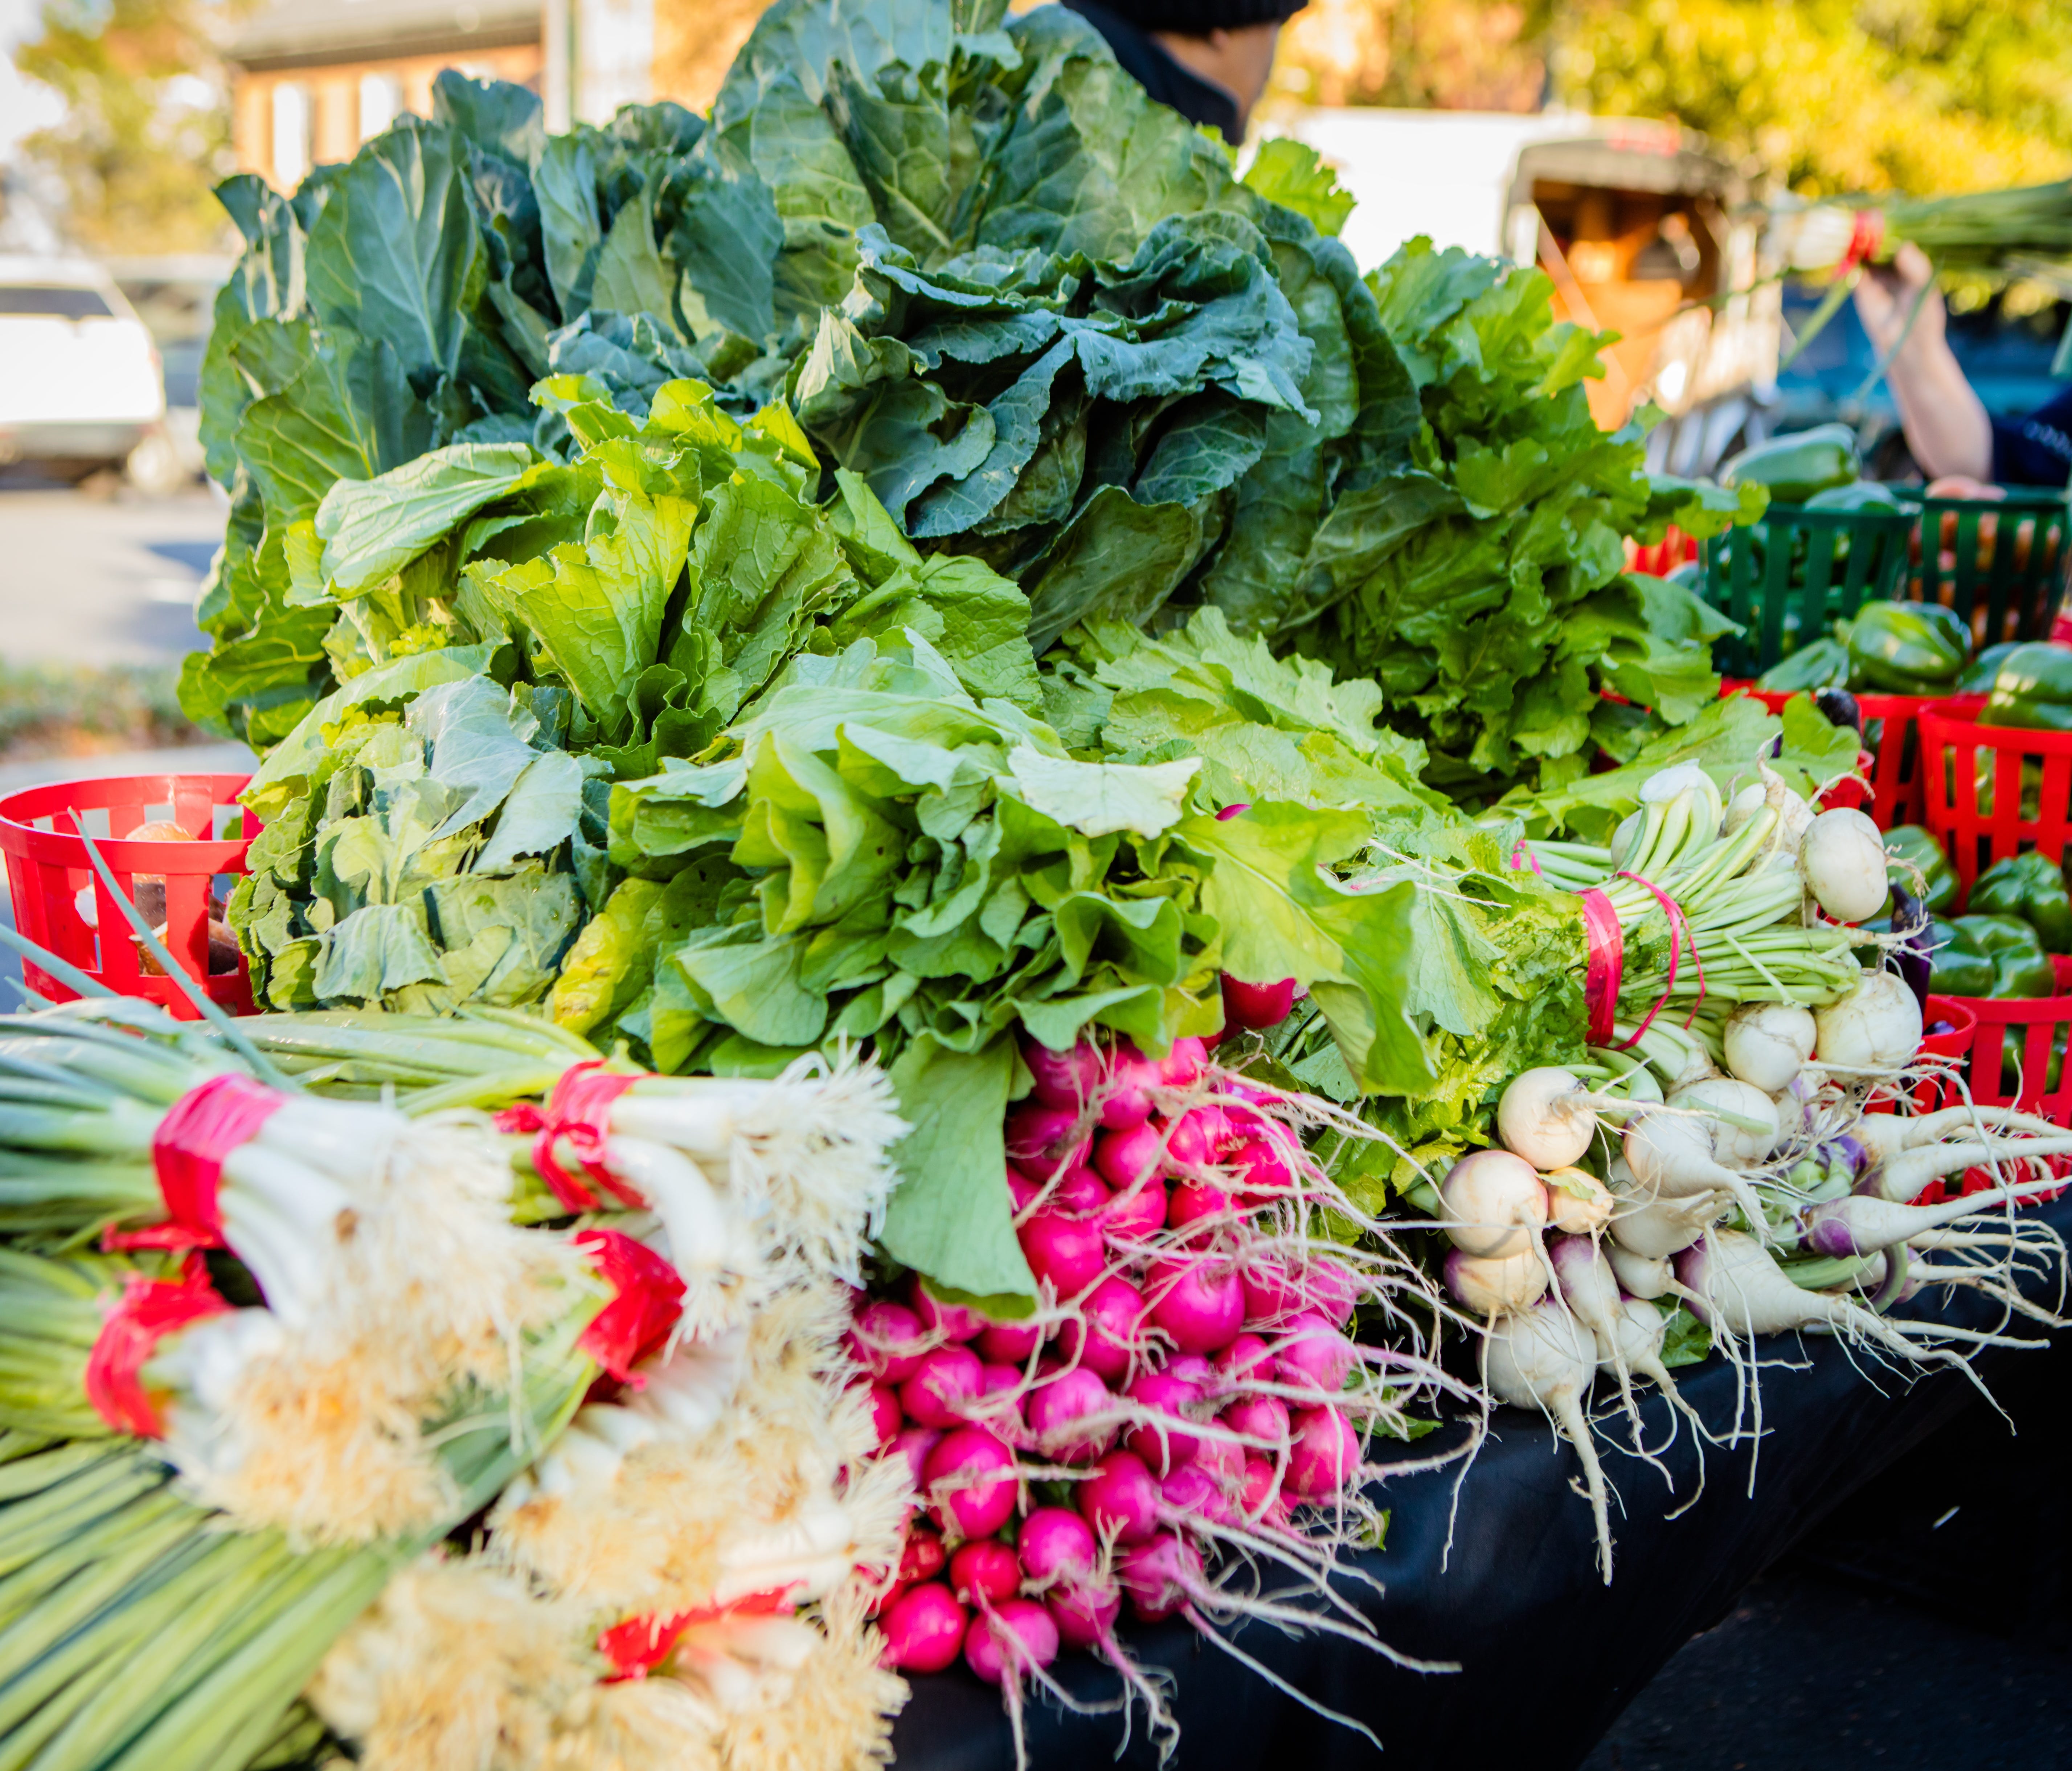 In Georgia, Statesboro Main Street Farmers Market meets on Saturdays from April to November in Charlie Olliff Square at Sea Island Bank. The Statesboro, Ga., gathering features more than 25 food and produce vendors.